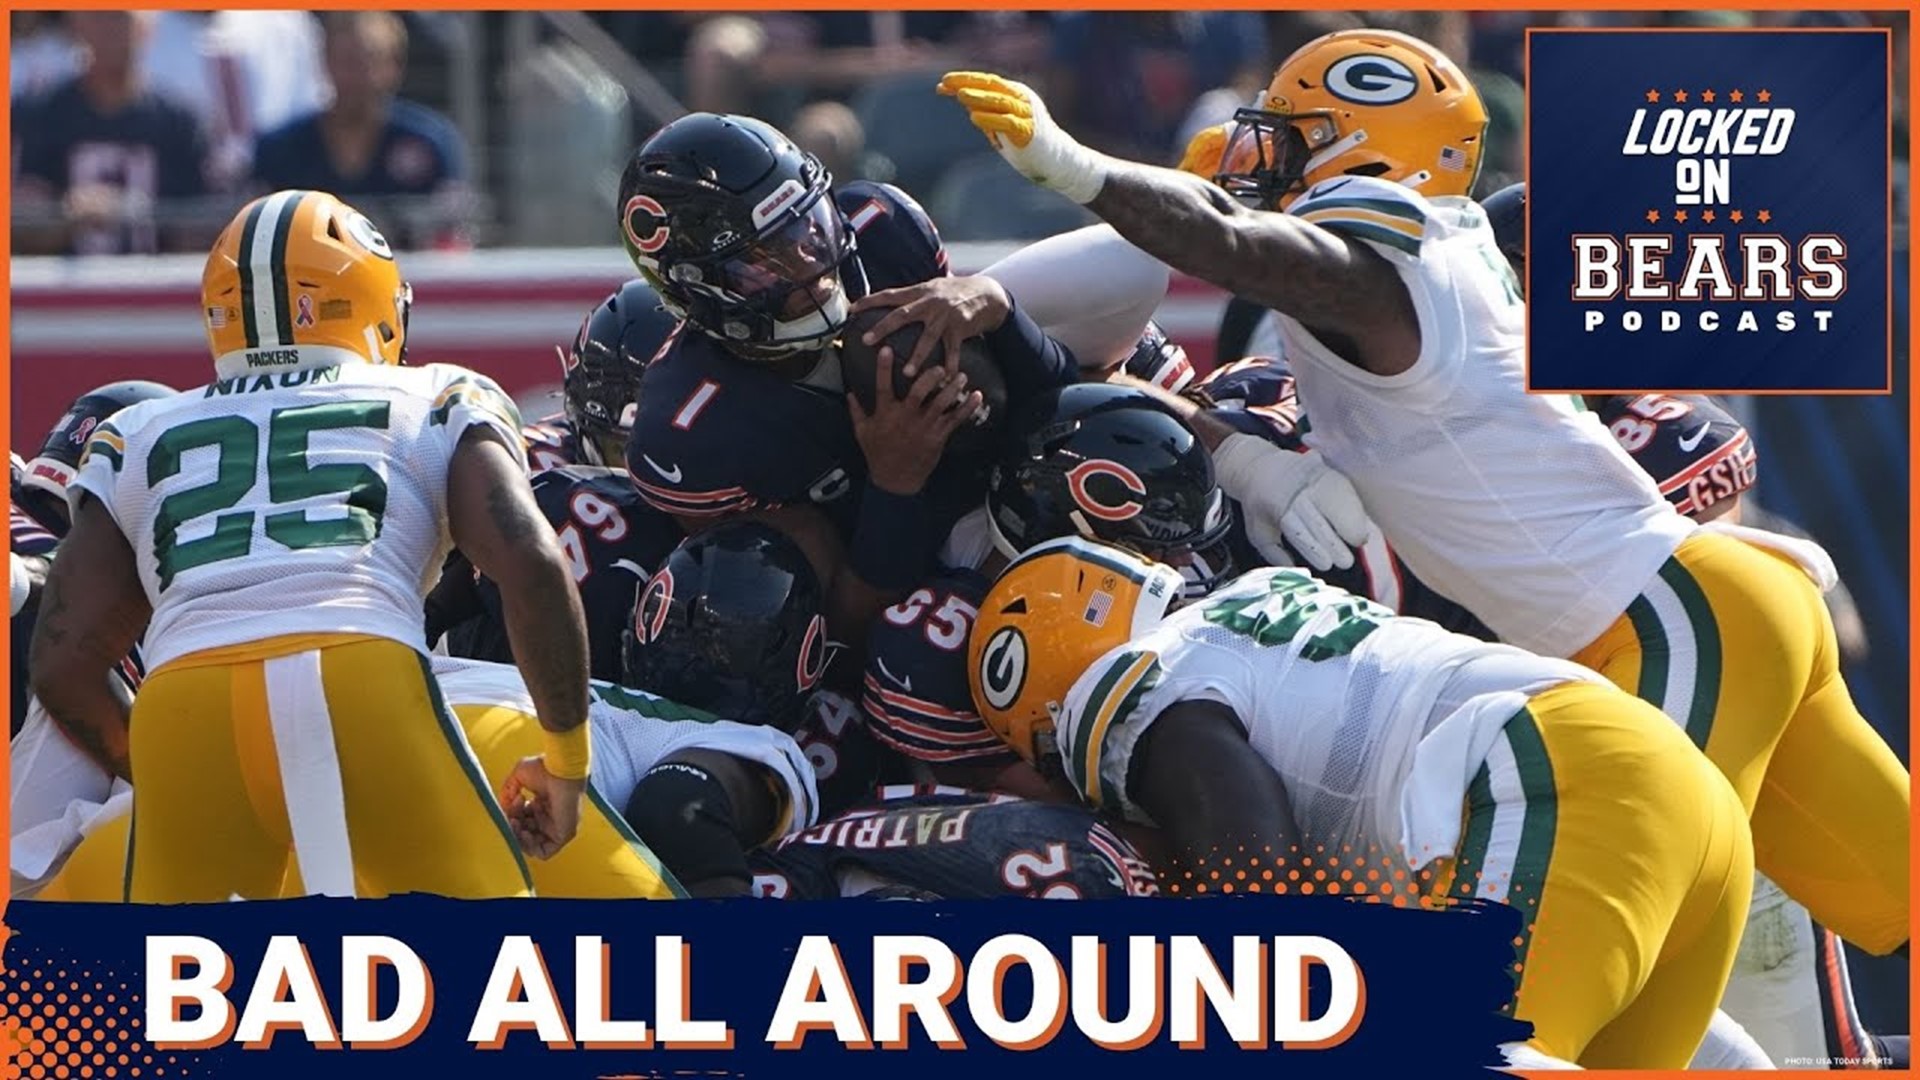 The offensive line wasn't good enough in the Chicago Bears' Week 1 loss to the Green Bay Packers. Neither was the play-calling from offensive coordinate Luke Getsy.